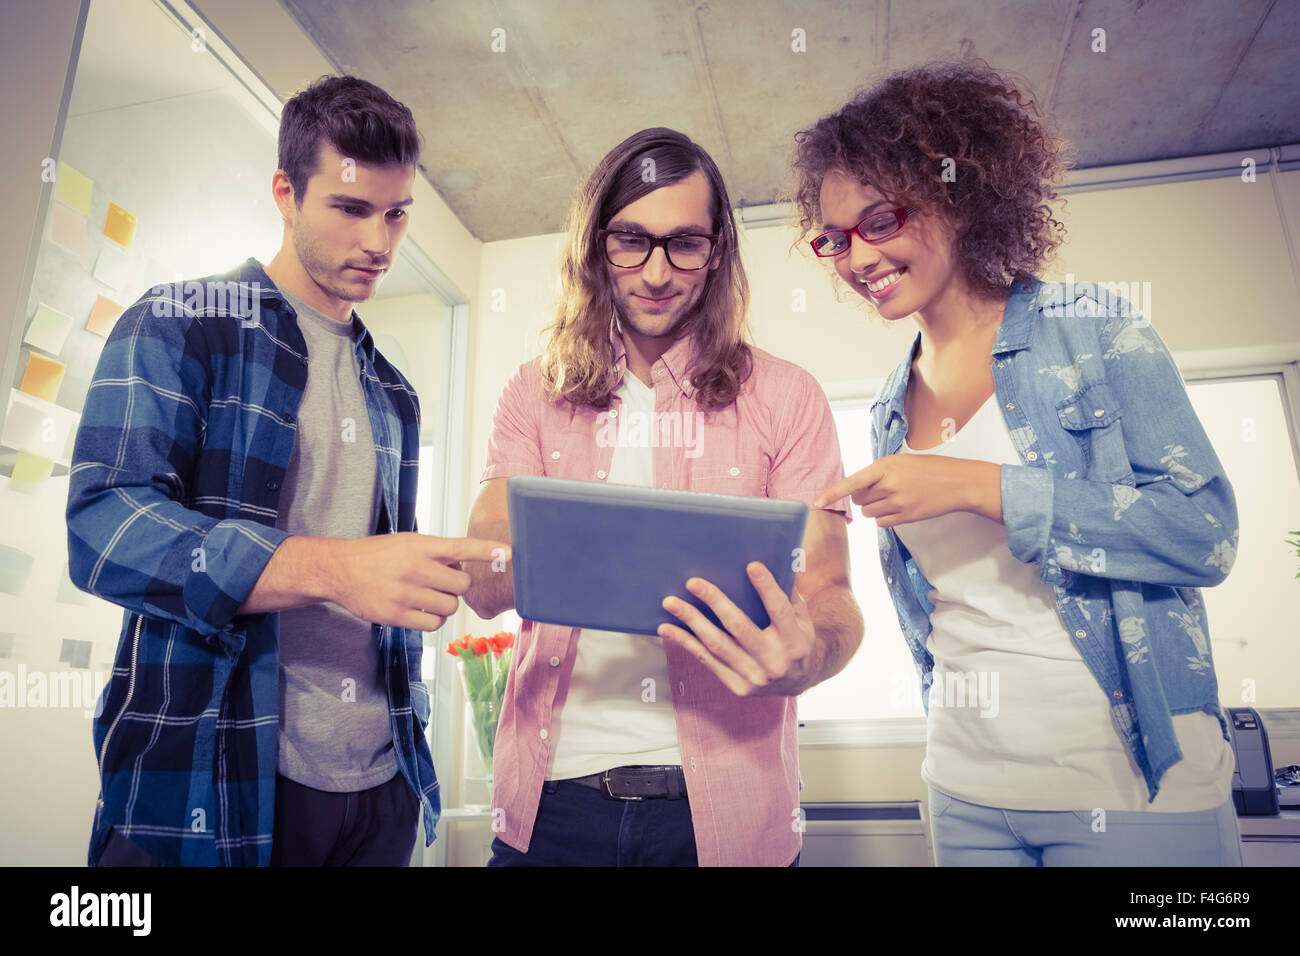 Smiling business people discussing over digital tablet Stock Photo